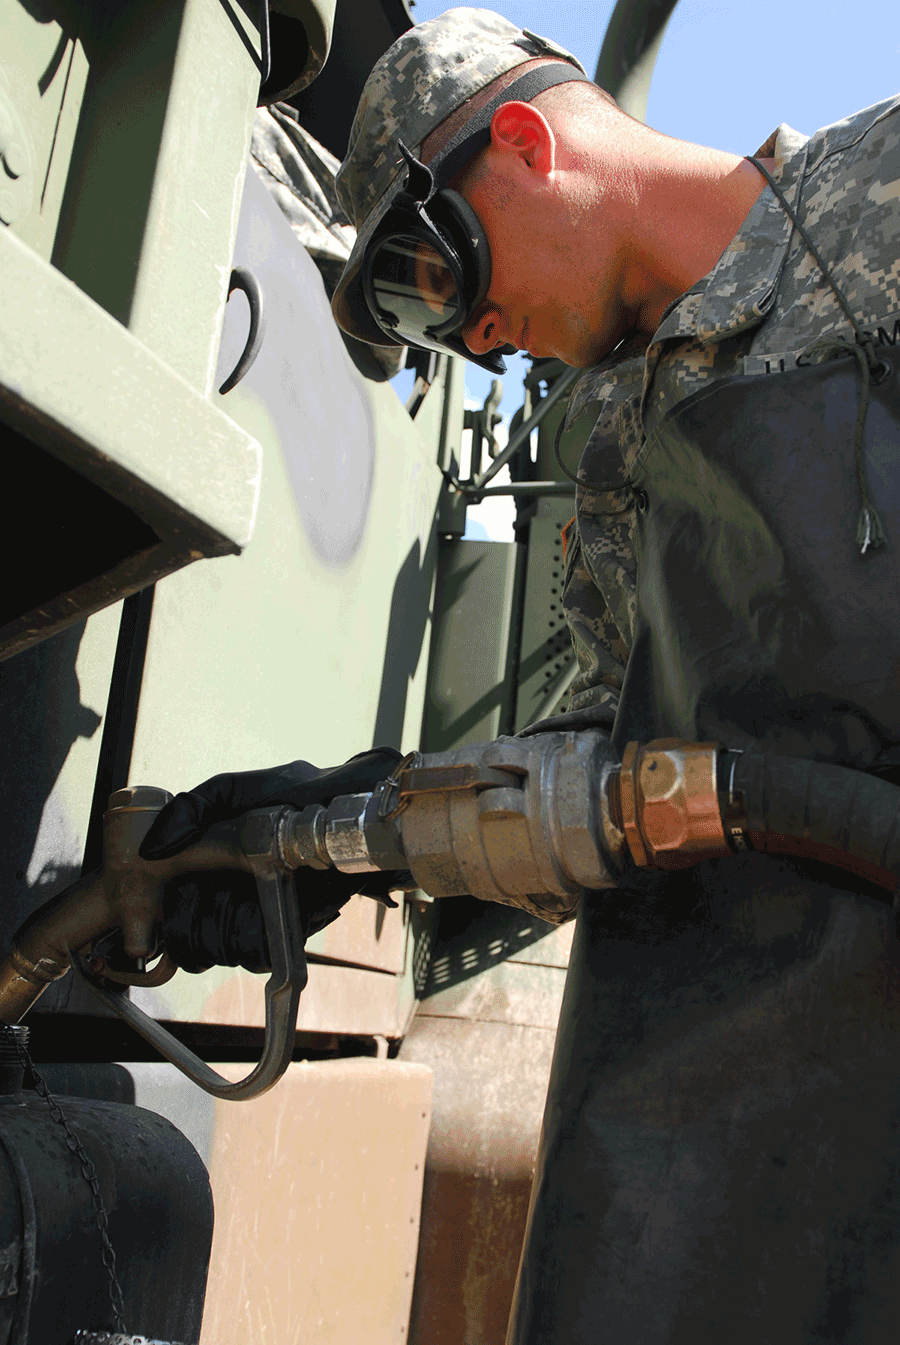 Soldier puts gas into tank.